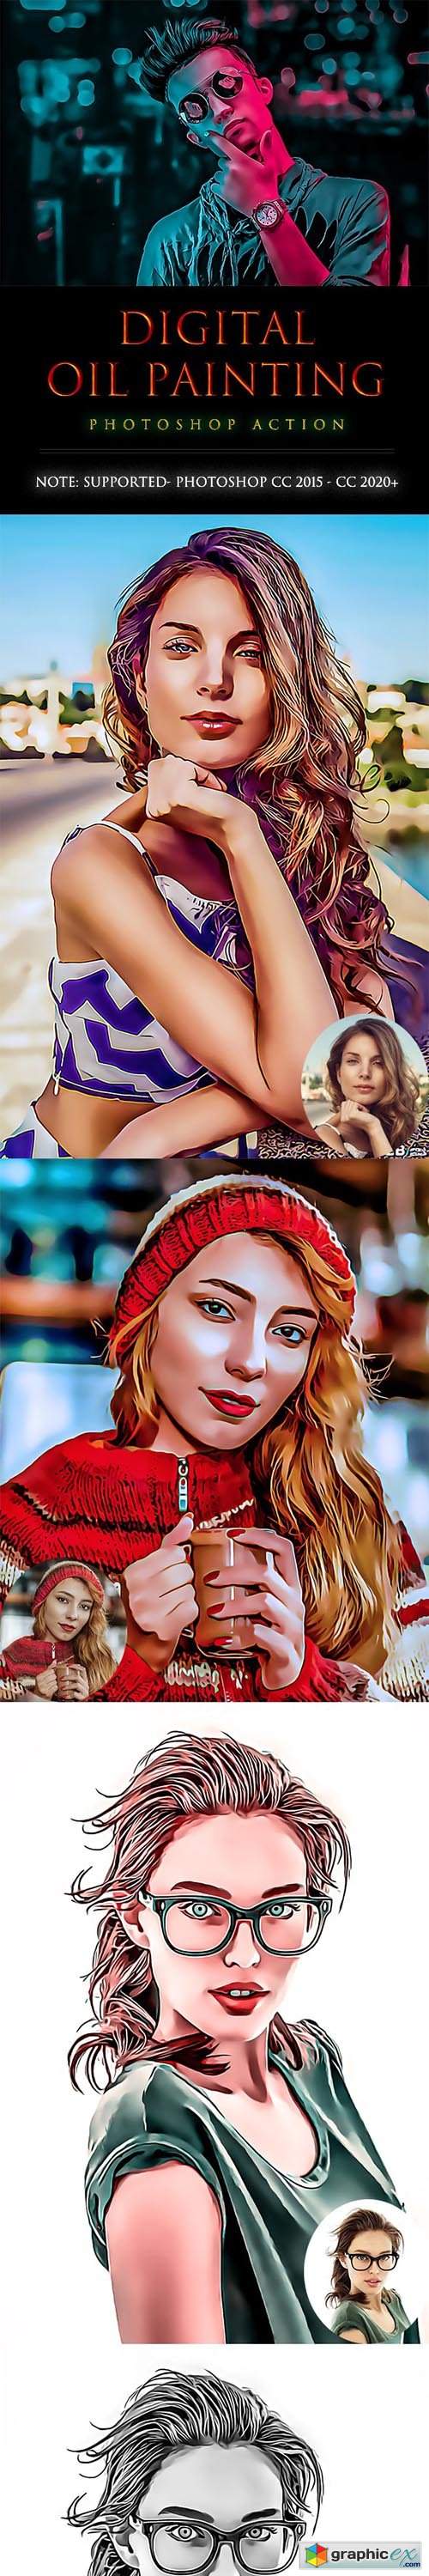 Digital OiL painting PhotoShop Action 